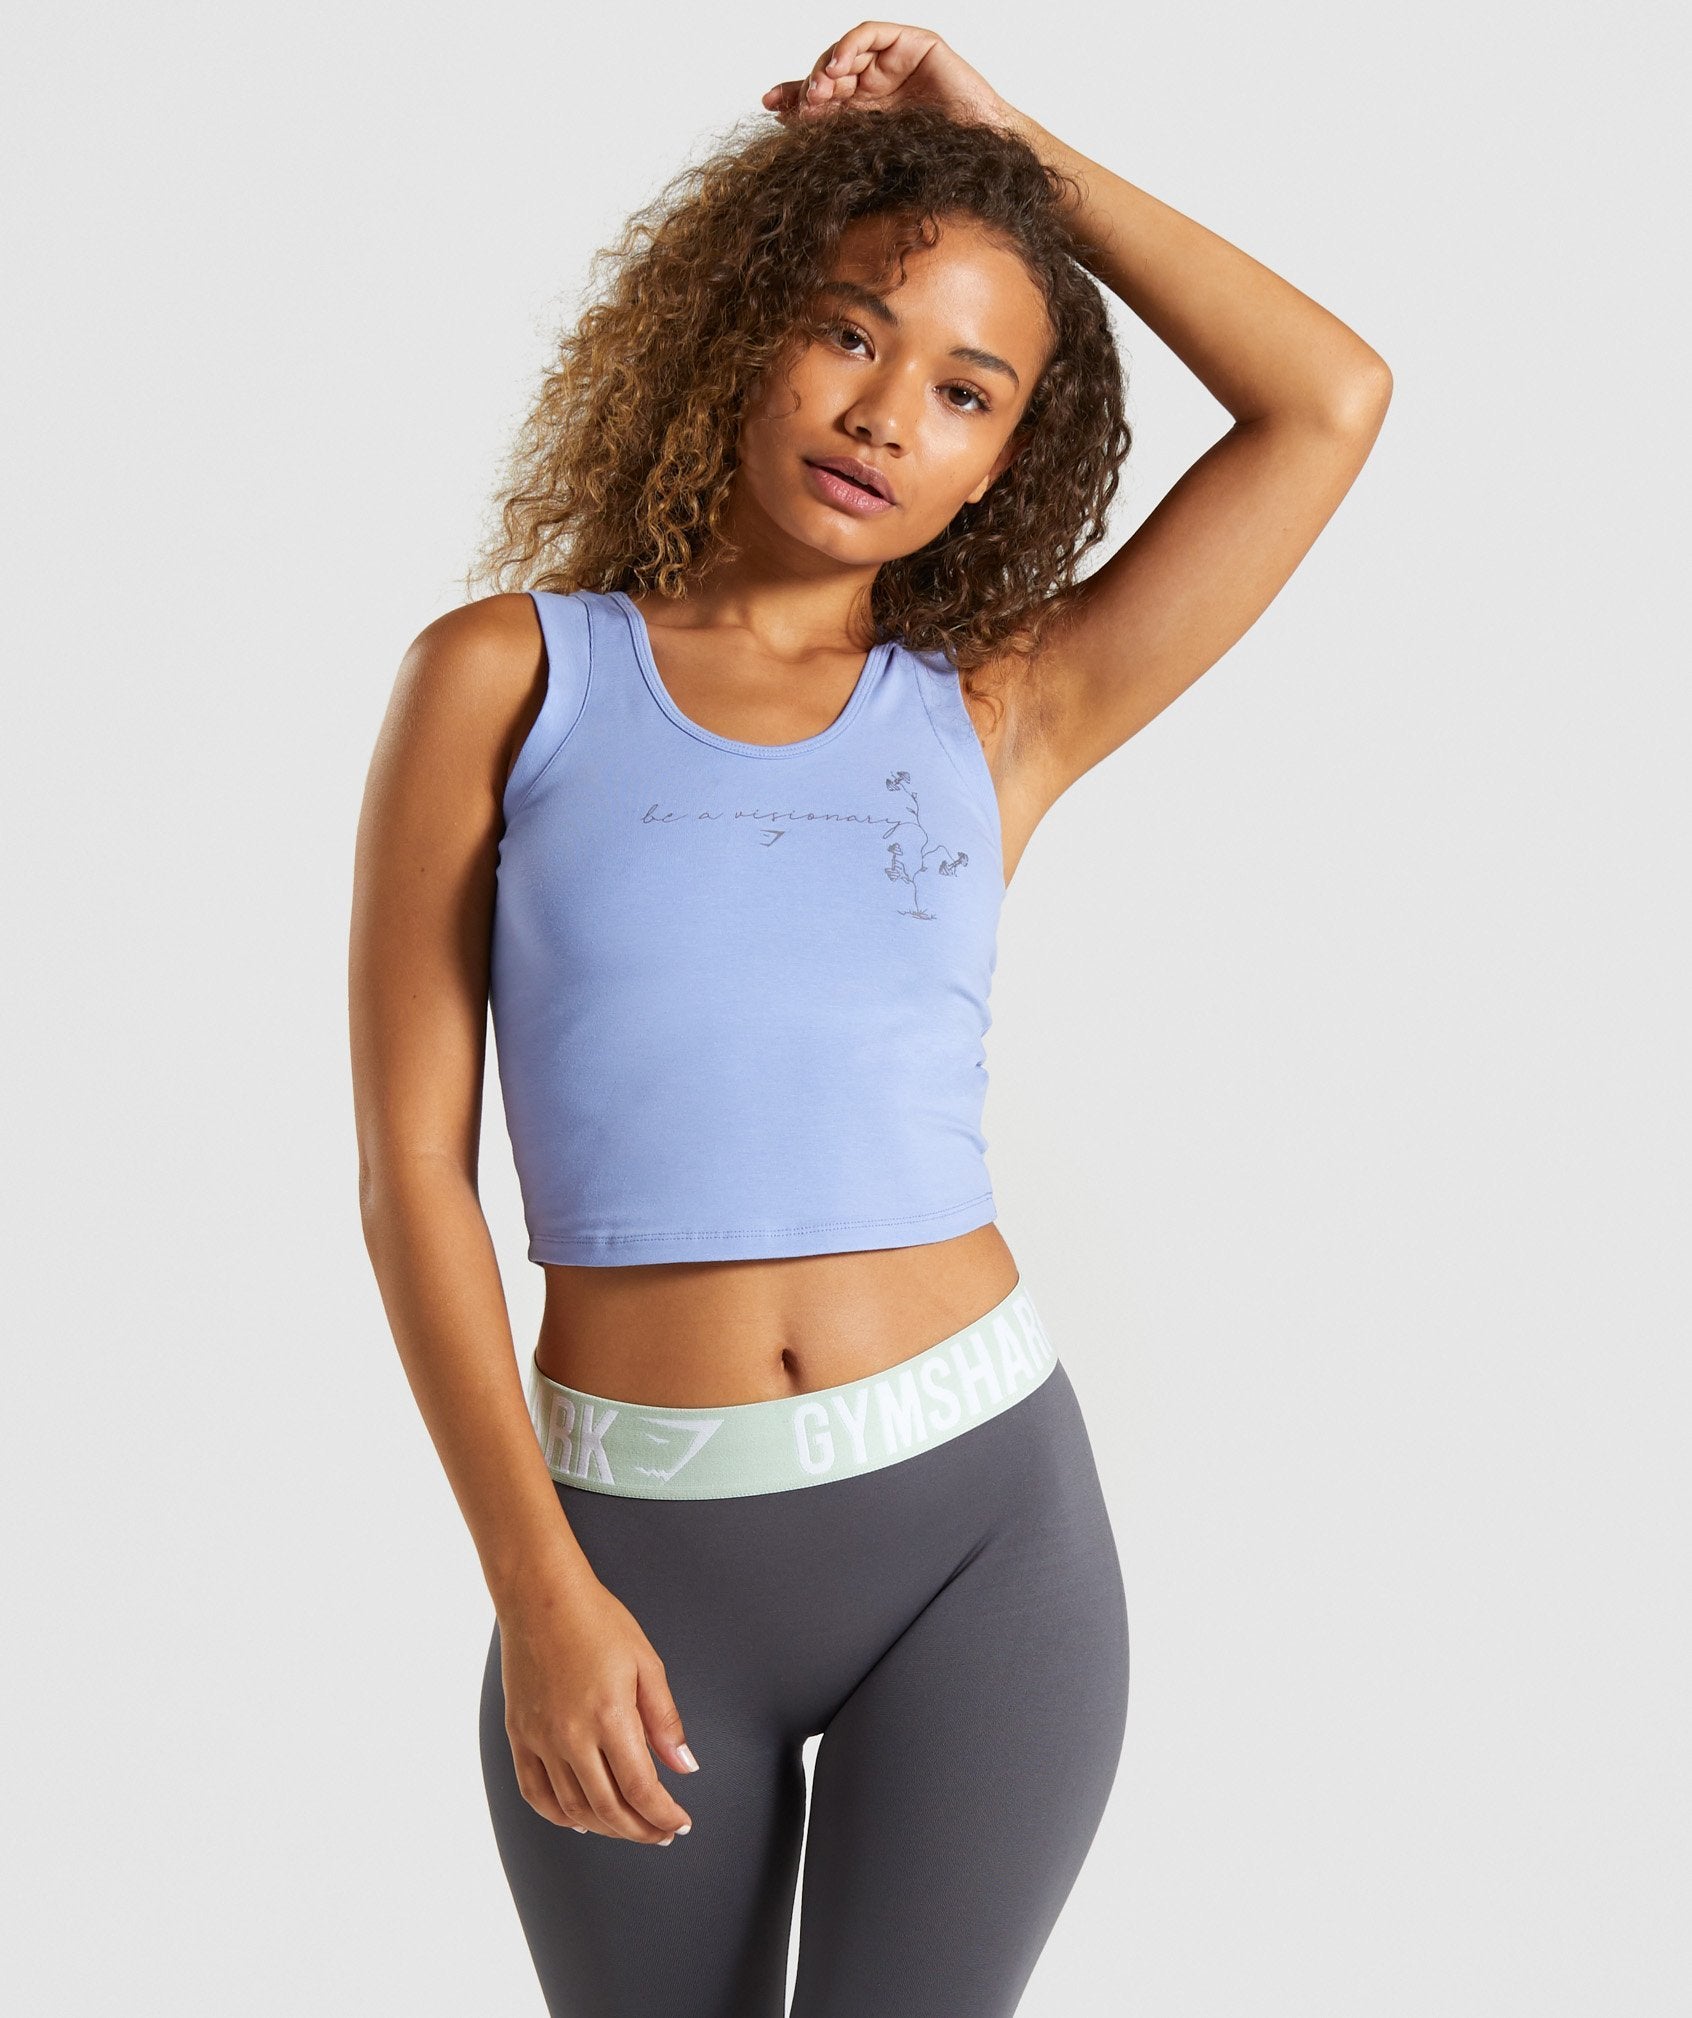 Roots Crop Top in Light Blue - view 1